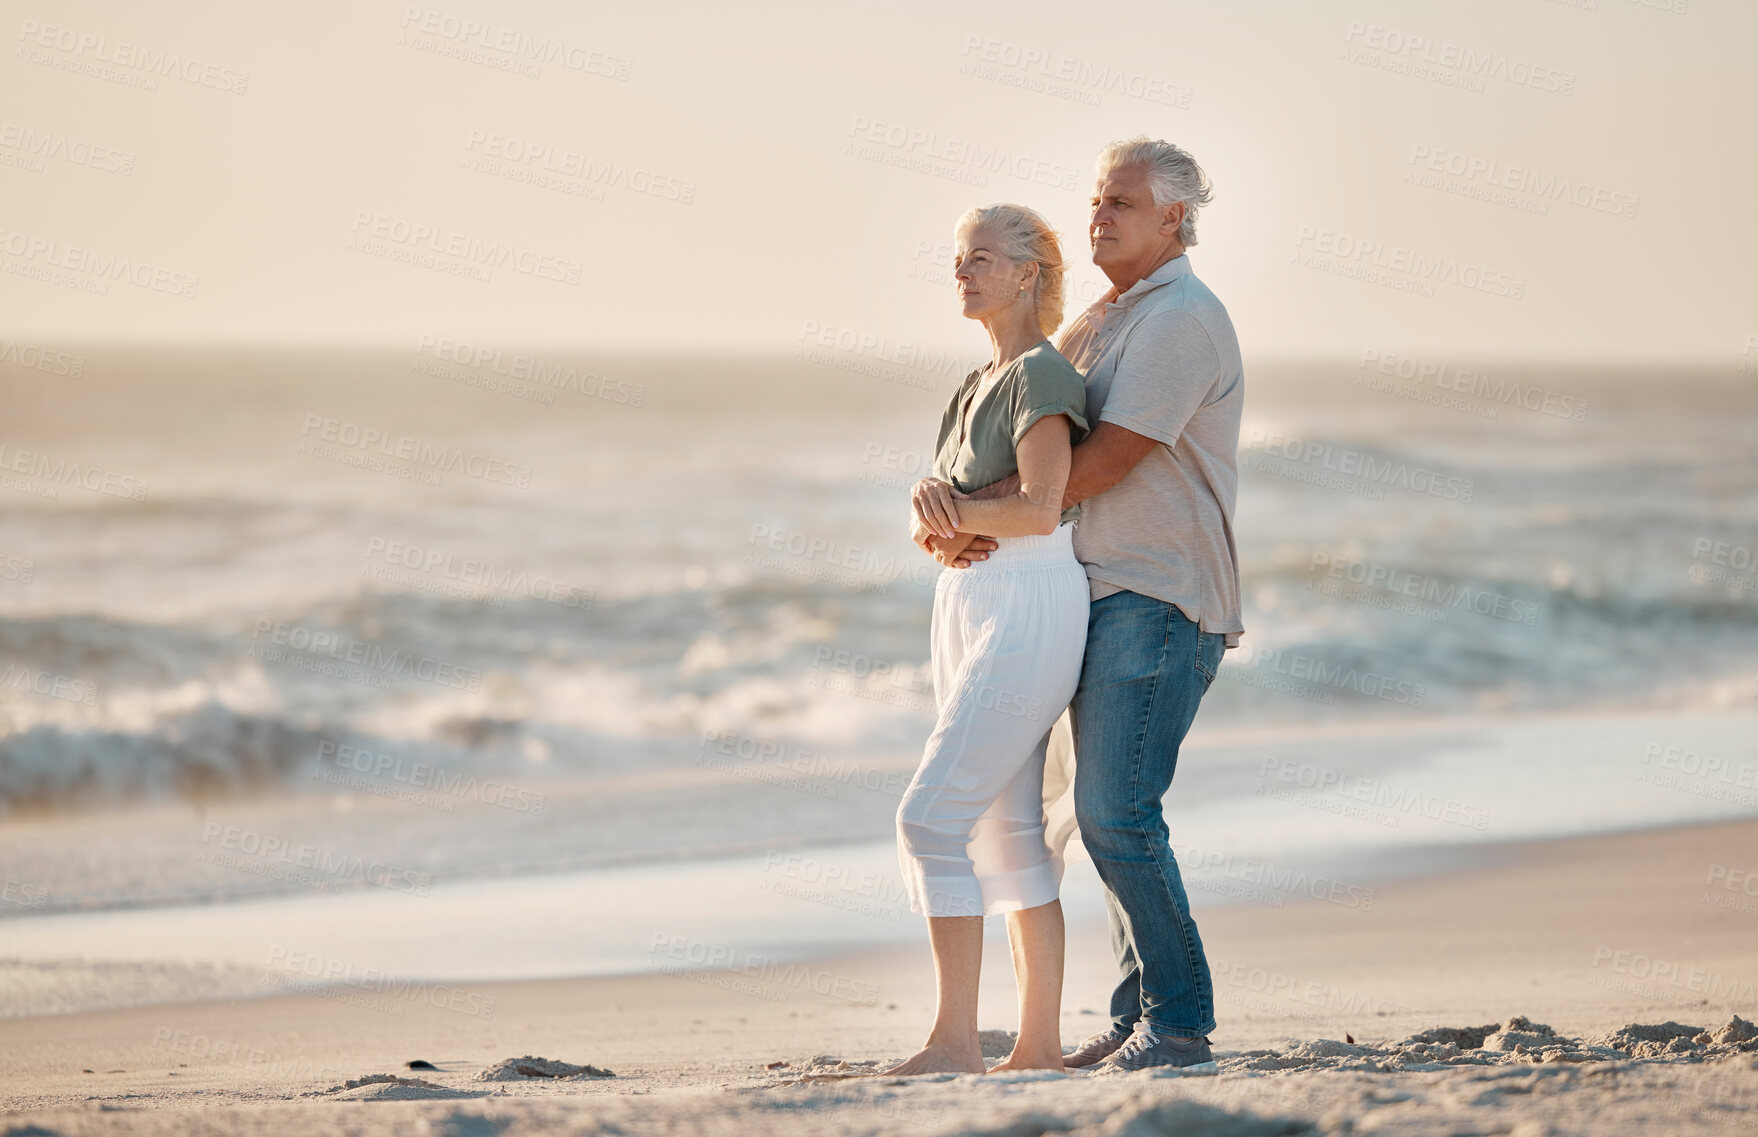 Buy stock photo Mature husband hugging his wife on the beach. Senior couple being affectionate on the beach. Senior couple enjoying the view by the ocean. Mature couple bonding on holiday by the sea together